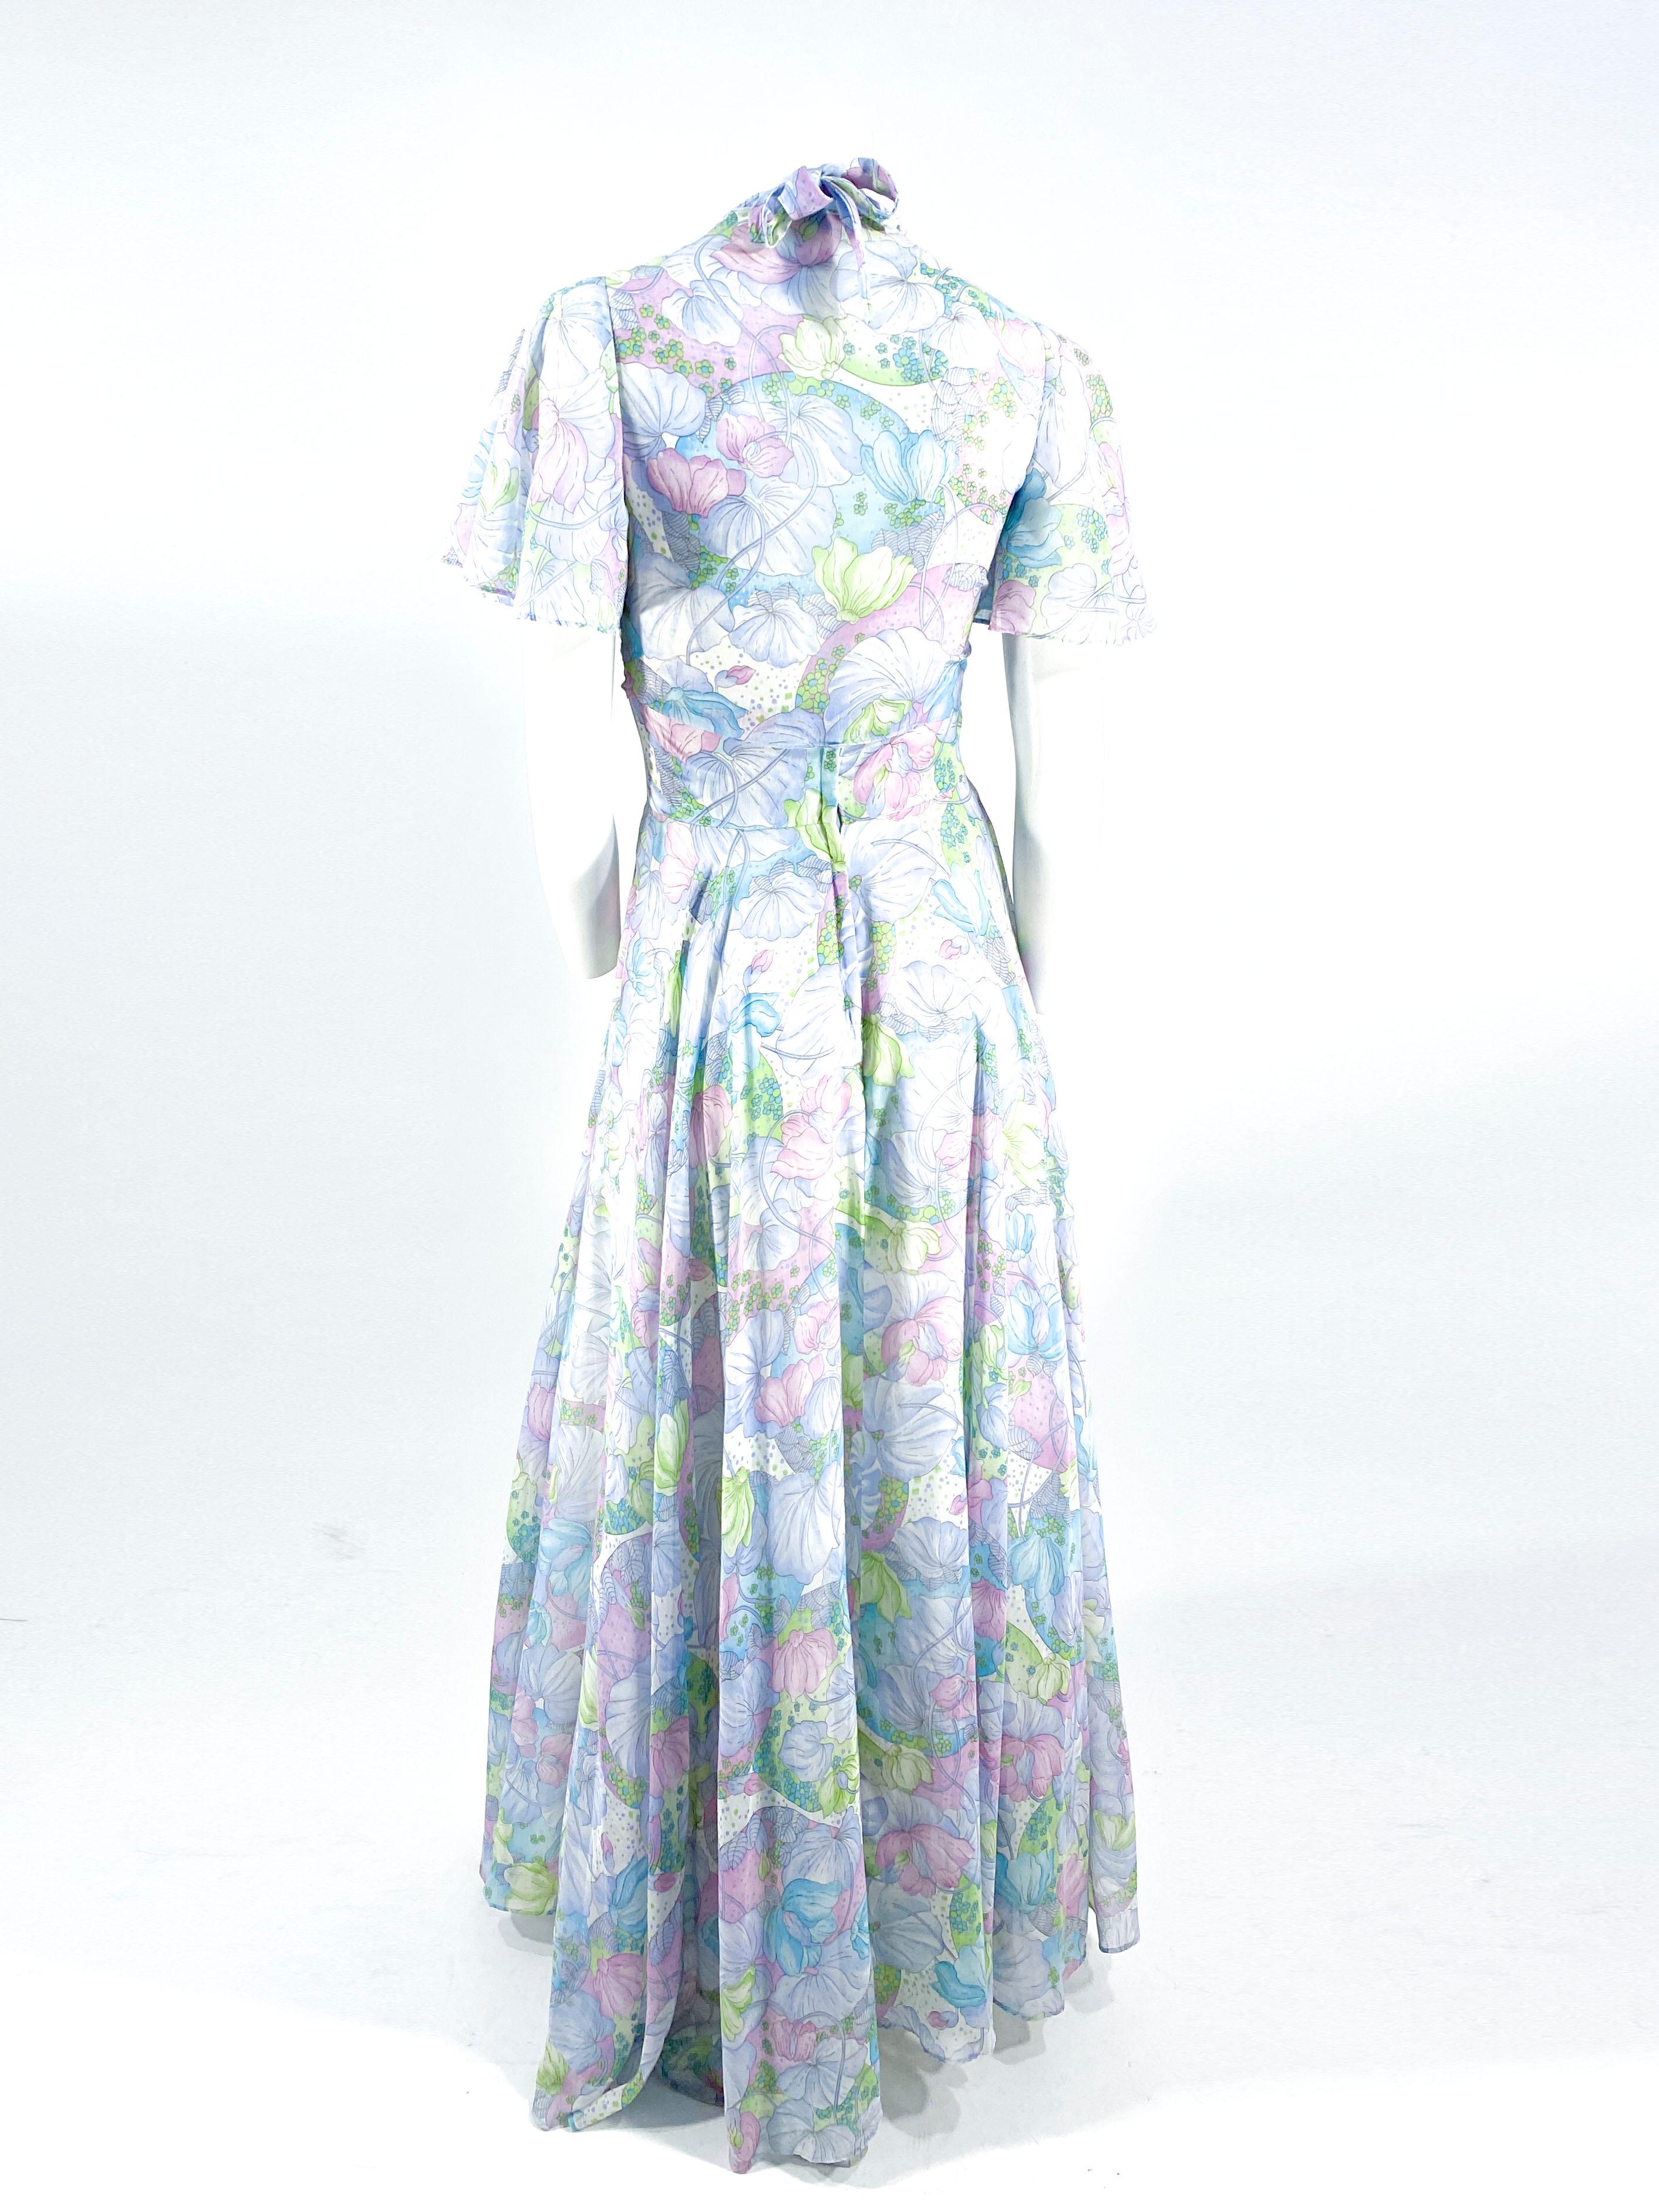 1970s pastel-colored floral printed dress featuring a halter bodice, flowing skirt, and a plunging backline. The matching bolero shrug has sheer fluted sleeves and a tie closure in the front. The back has a nylon zipper closure.